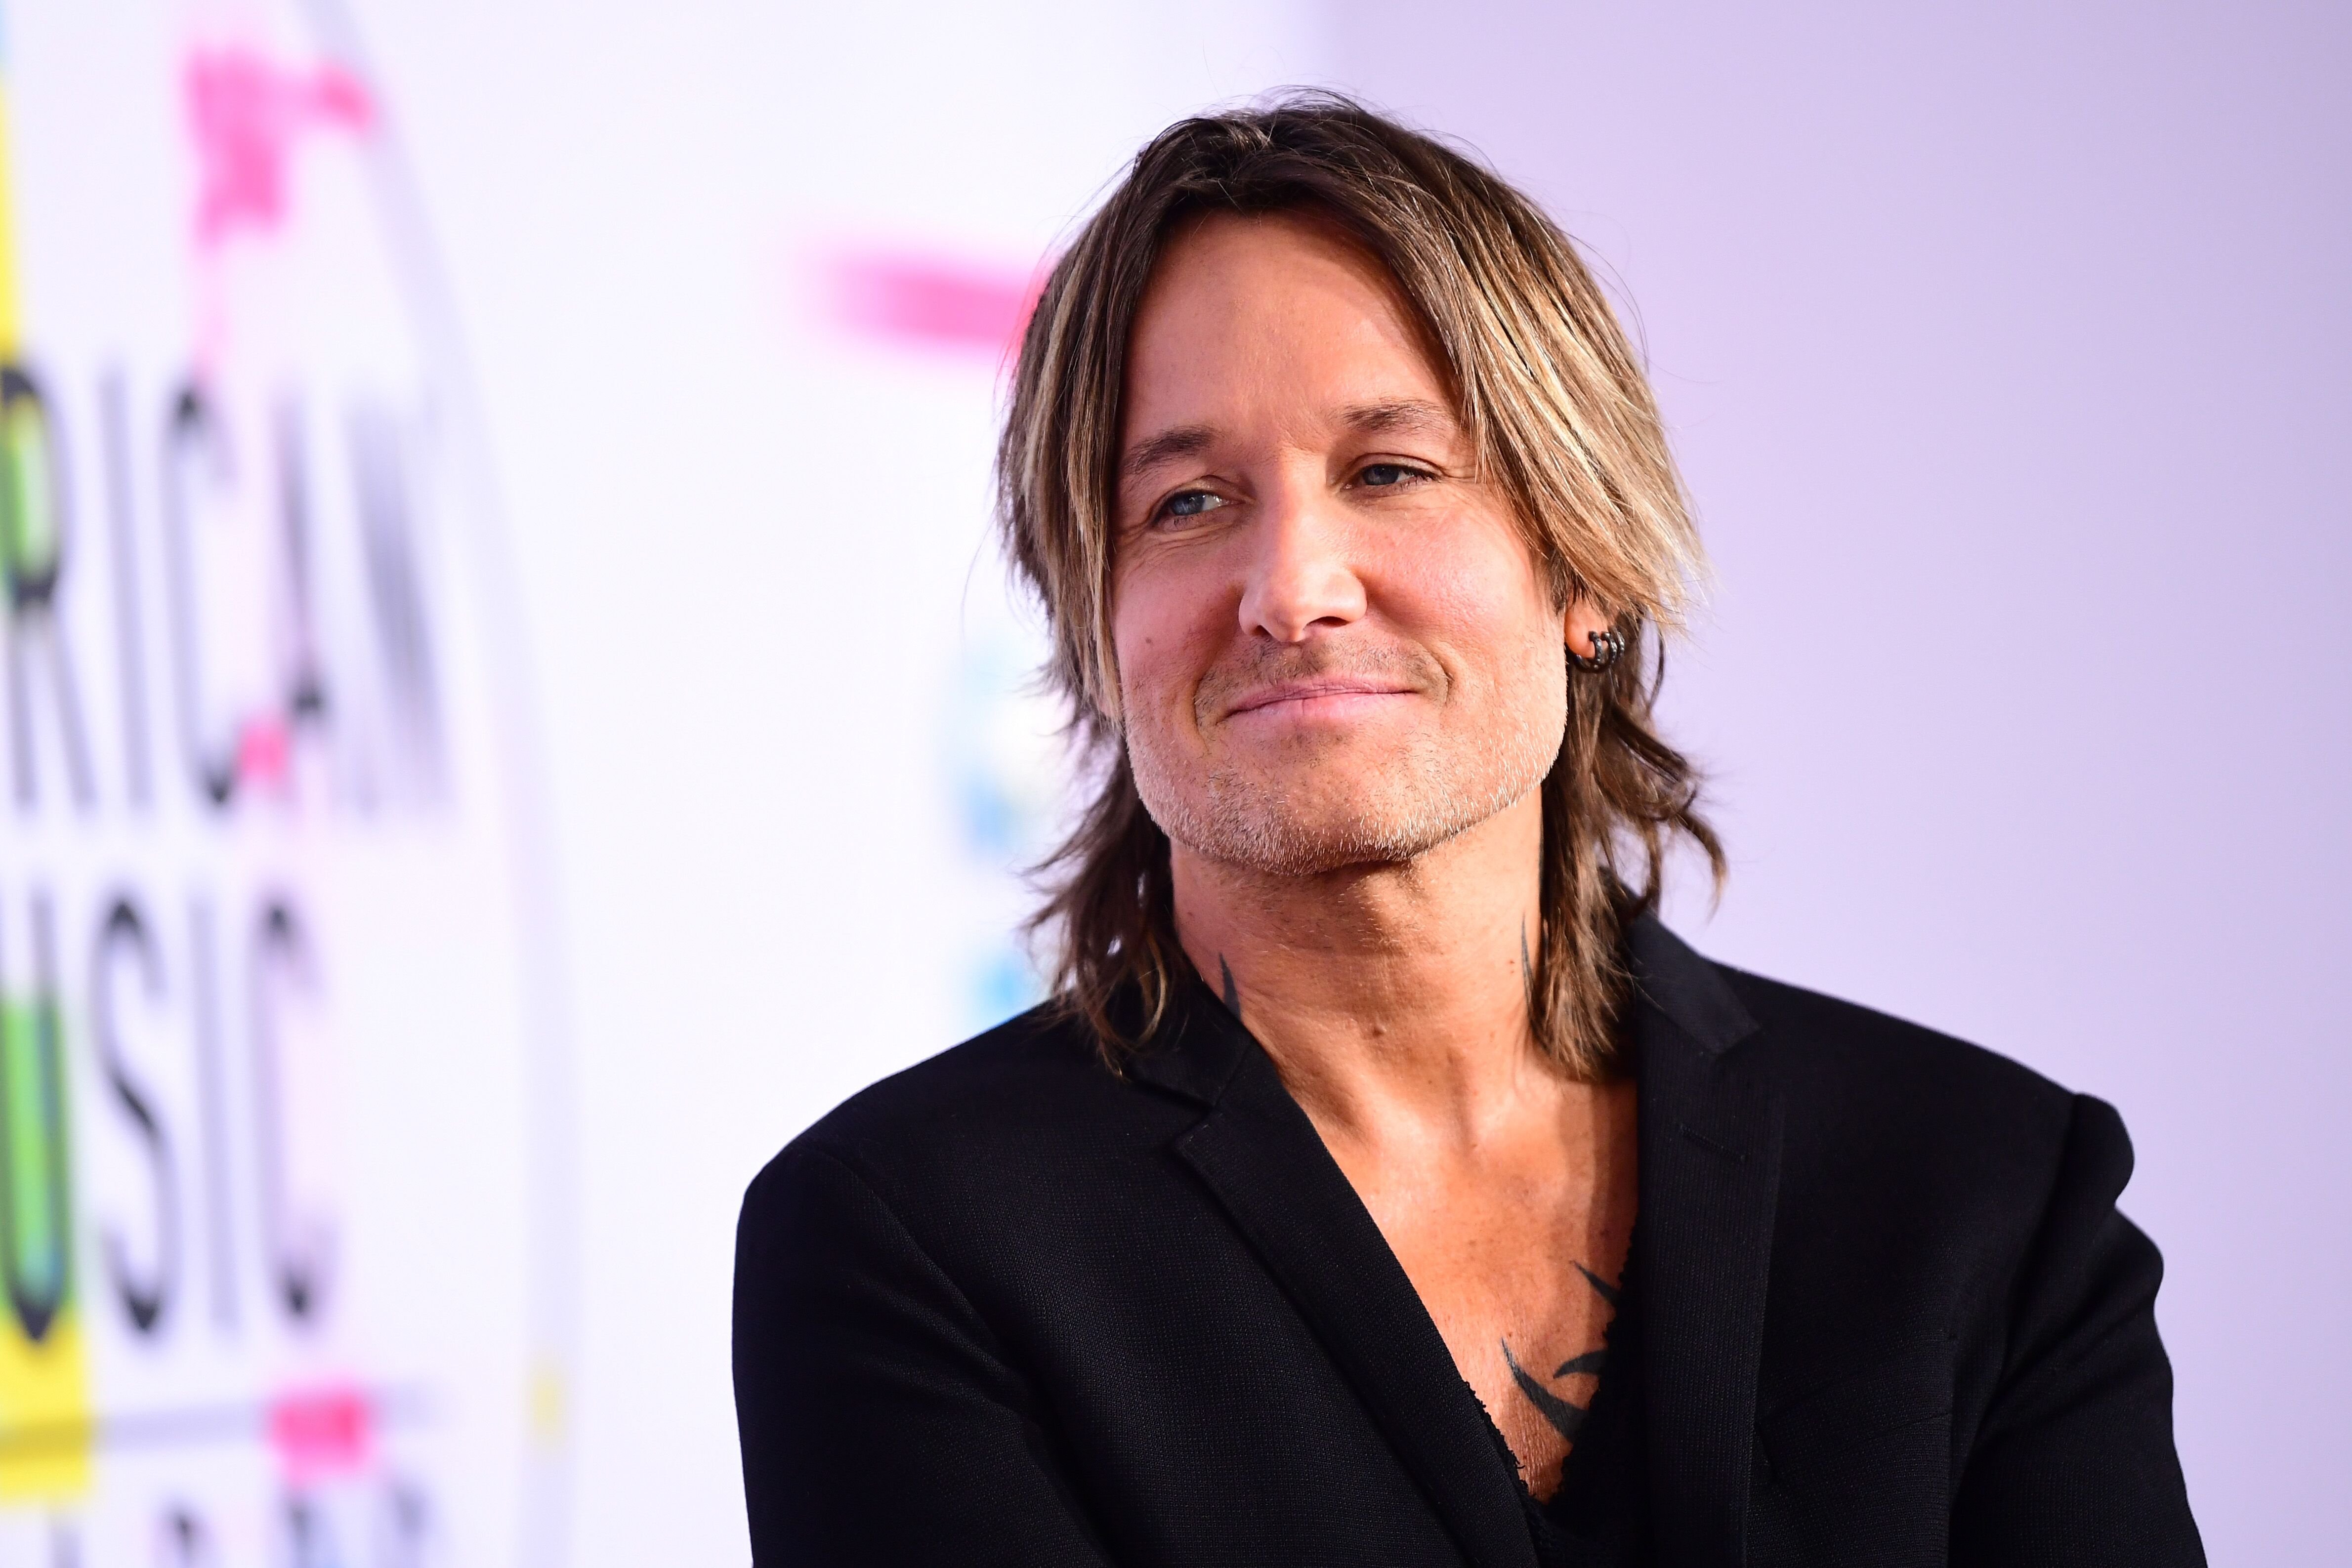 Keith Urban at the American Music Awards at Microsoft Theater on November 19, 2017, in Los Angeles, California | Photo: Emma McIntyre/AMA2017/Getty Images